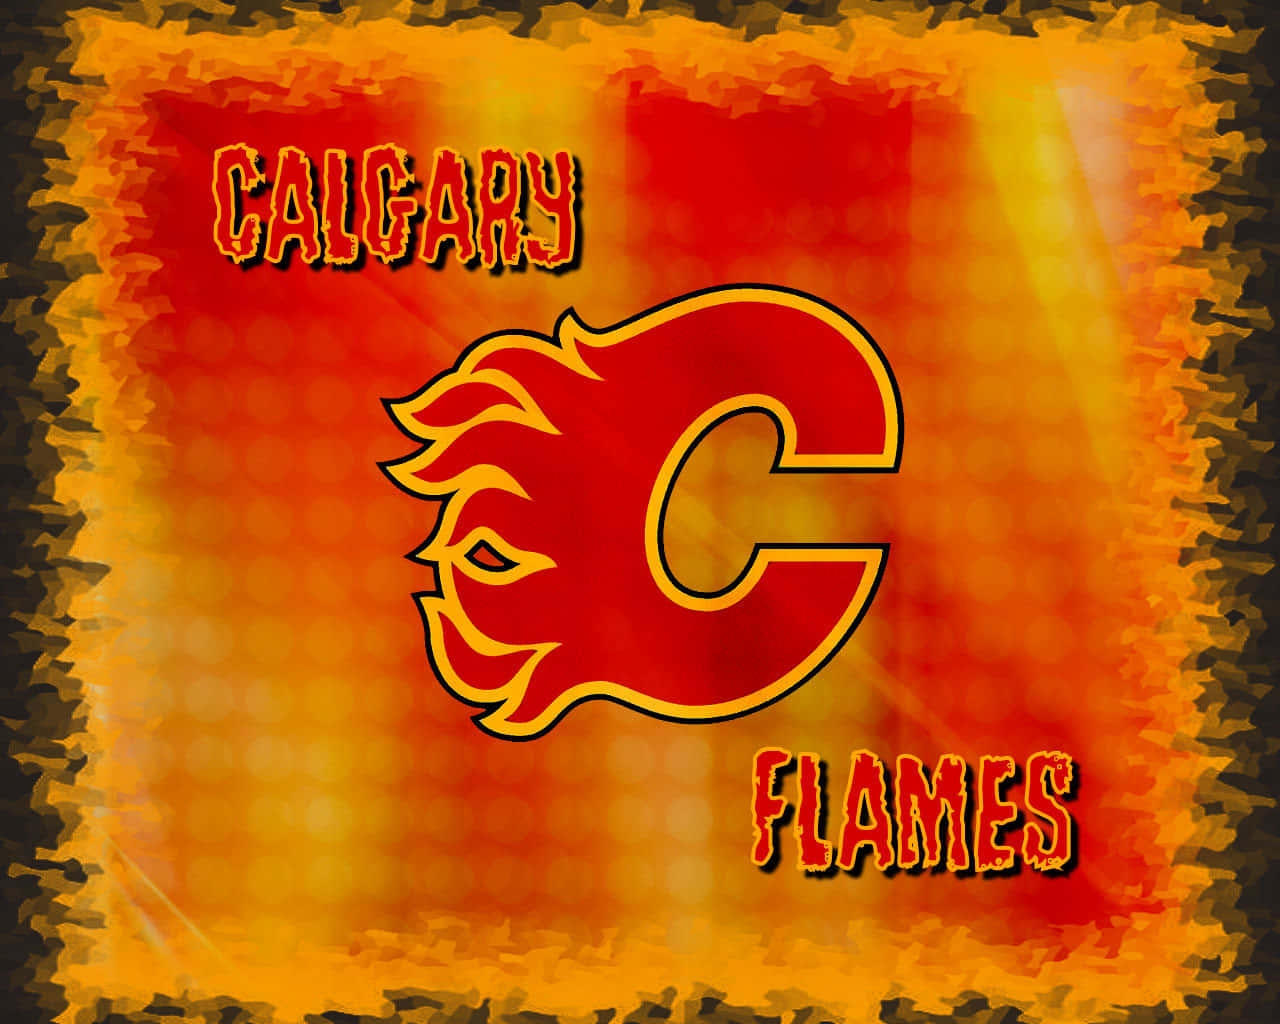 Gearing Up for the Flames